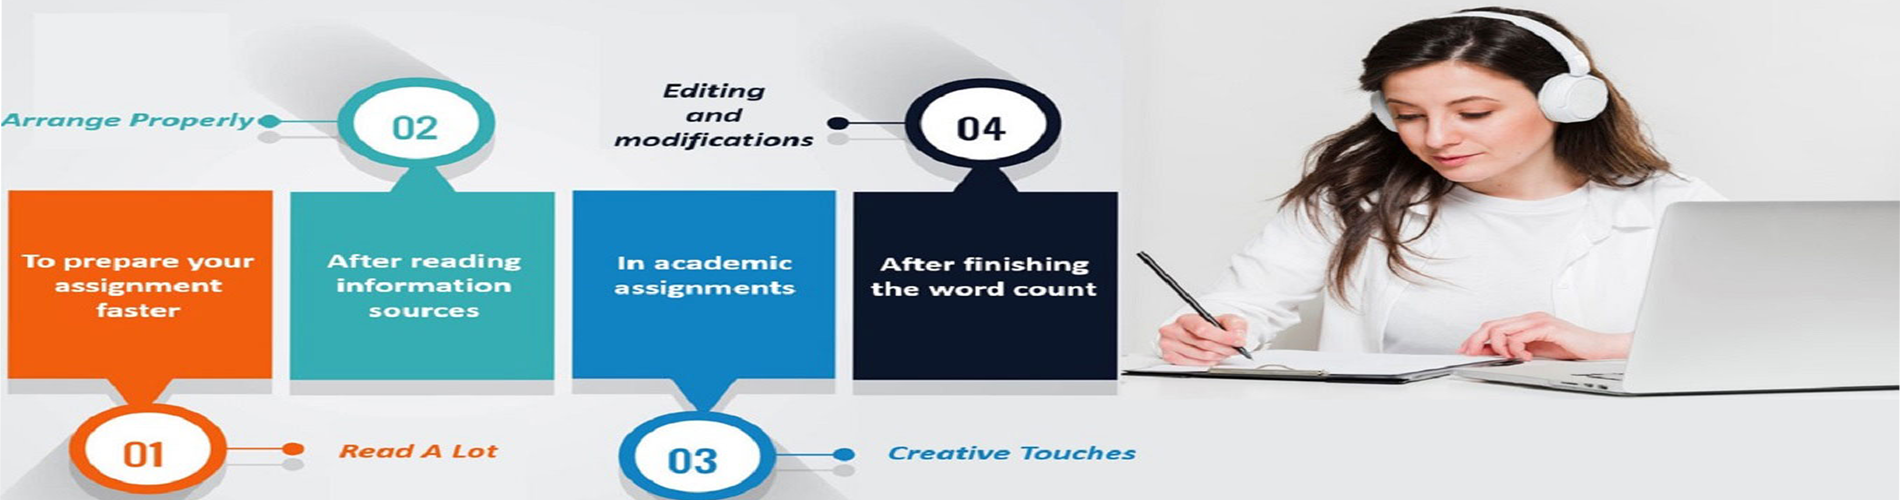 Business writing services sydney